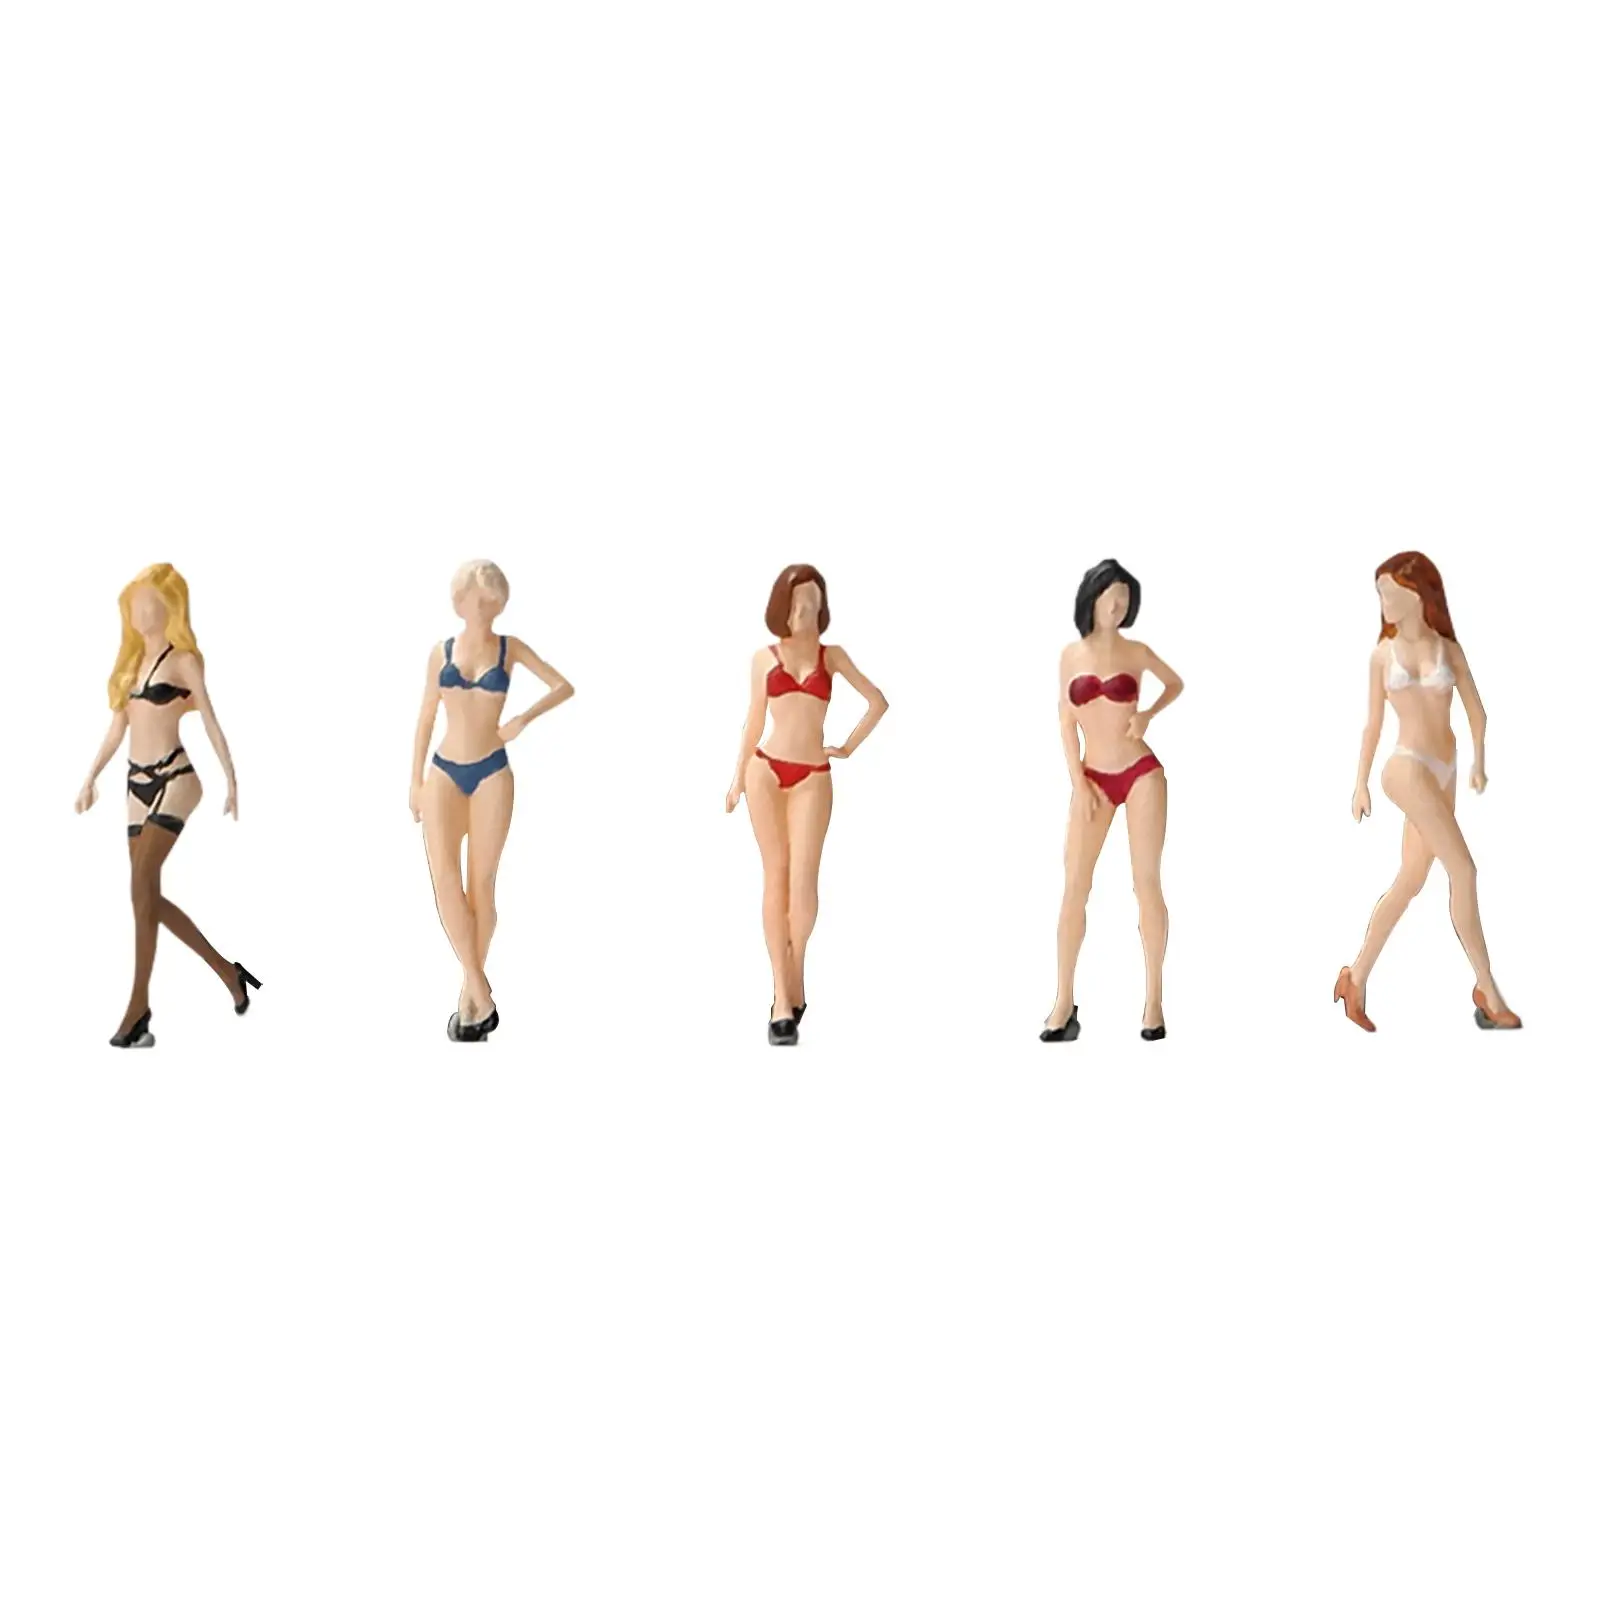 1/64 Scale Models Figurine Miniature People Model for Diorama Layout Decor